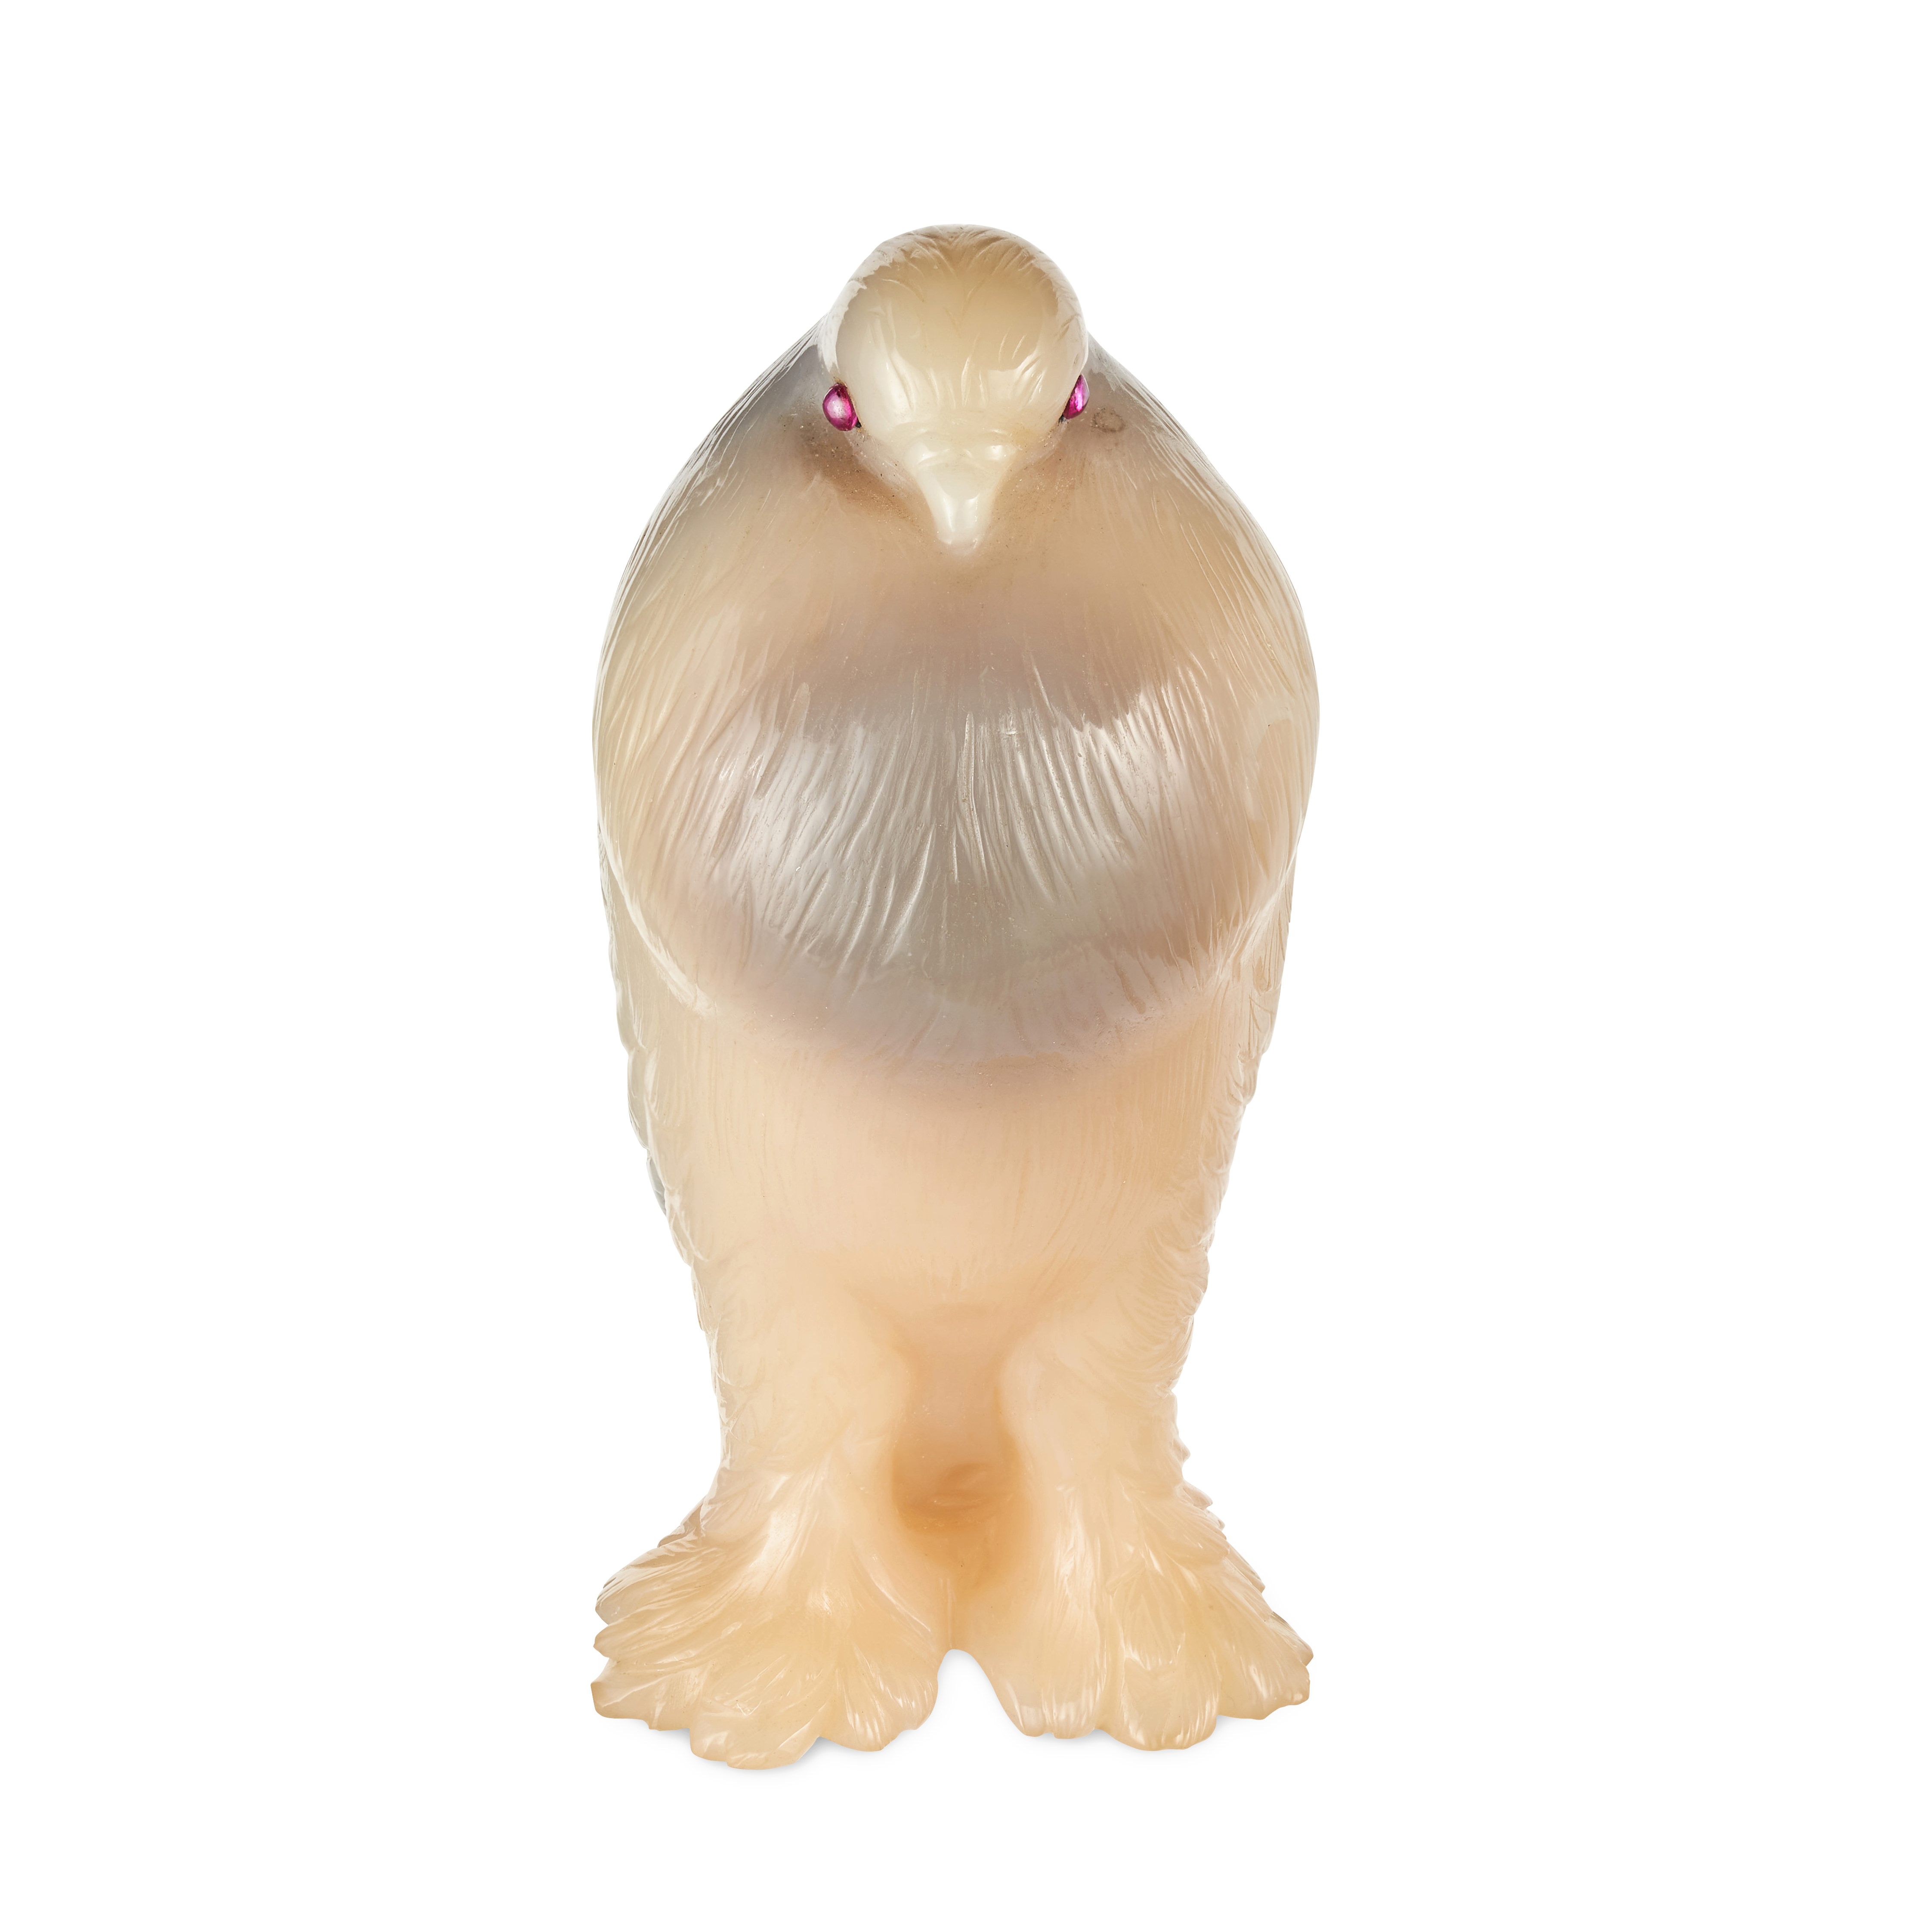 FABERGE, AN IMPORTANT JEWELLED CHALCEDONY MODEL OF A POUTER PIGEON, ST PETERSBURG CIRCA 1900 - Image 3 of 12